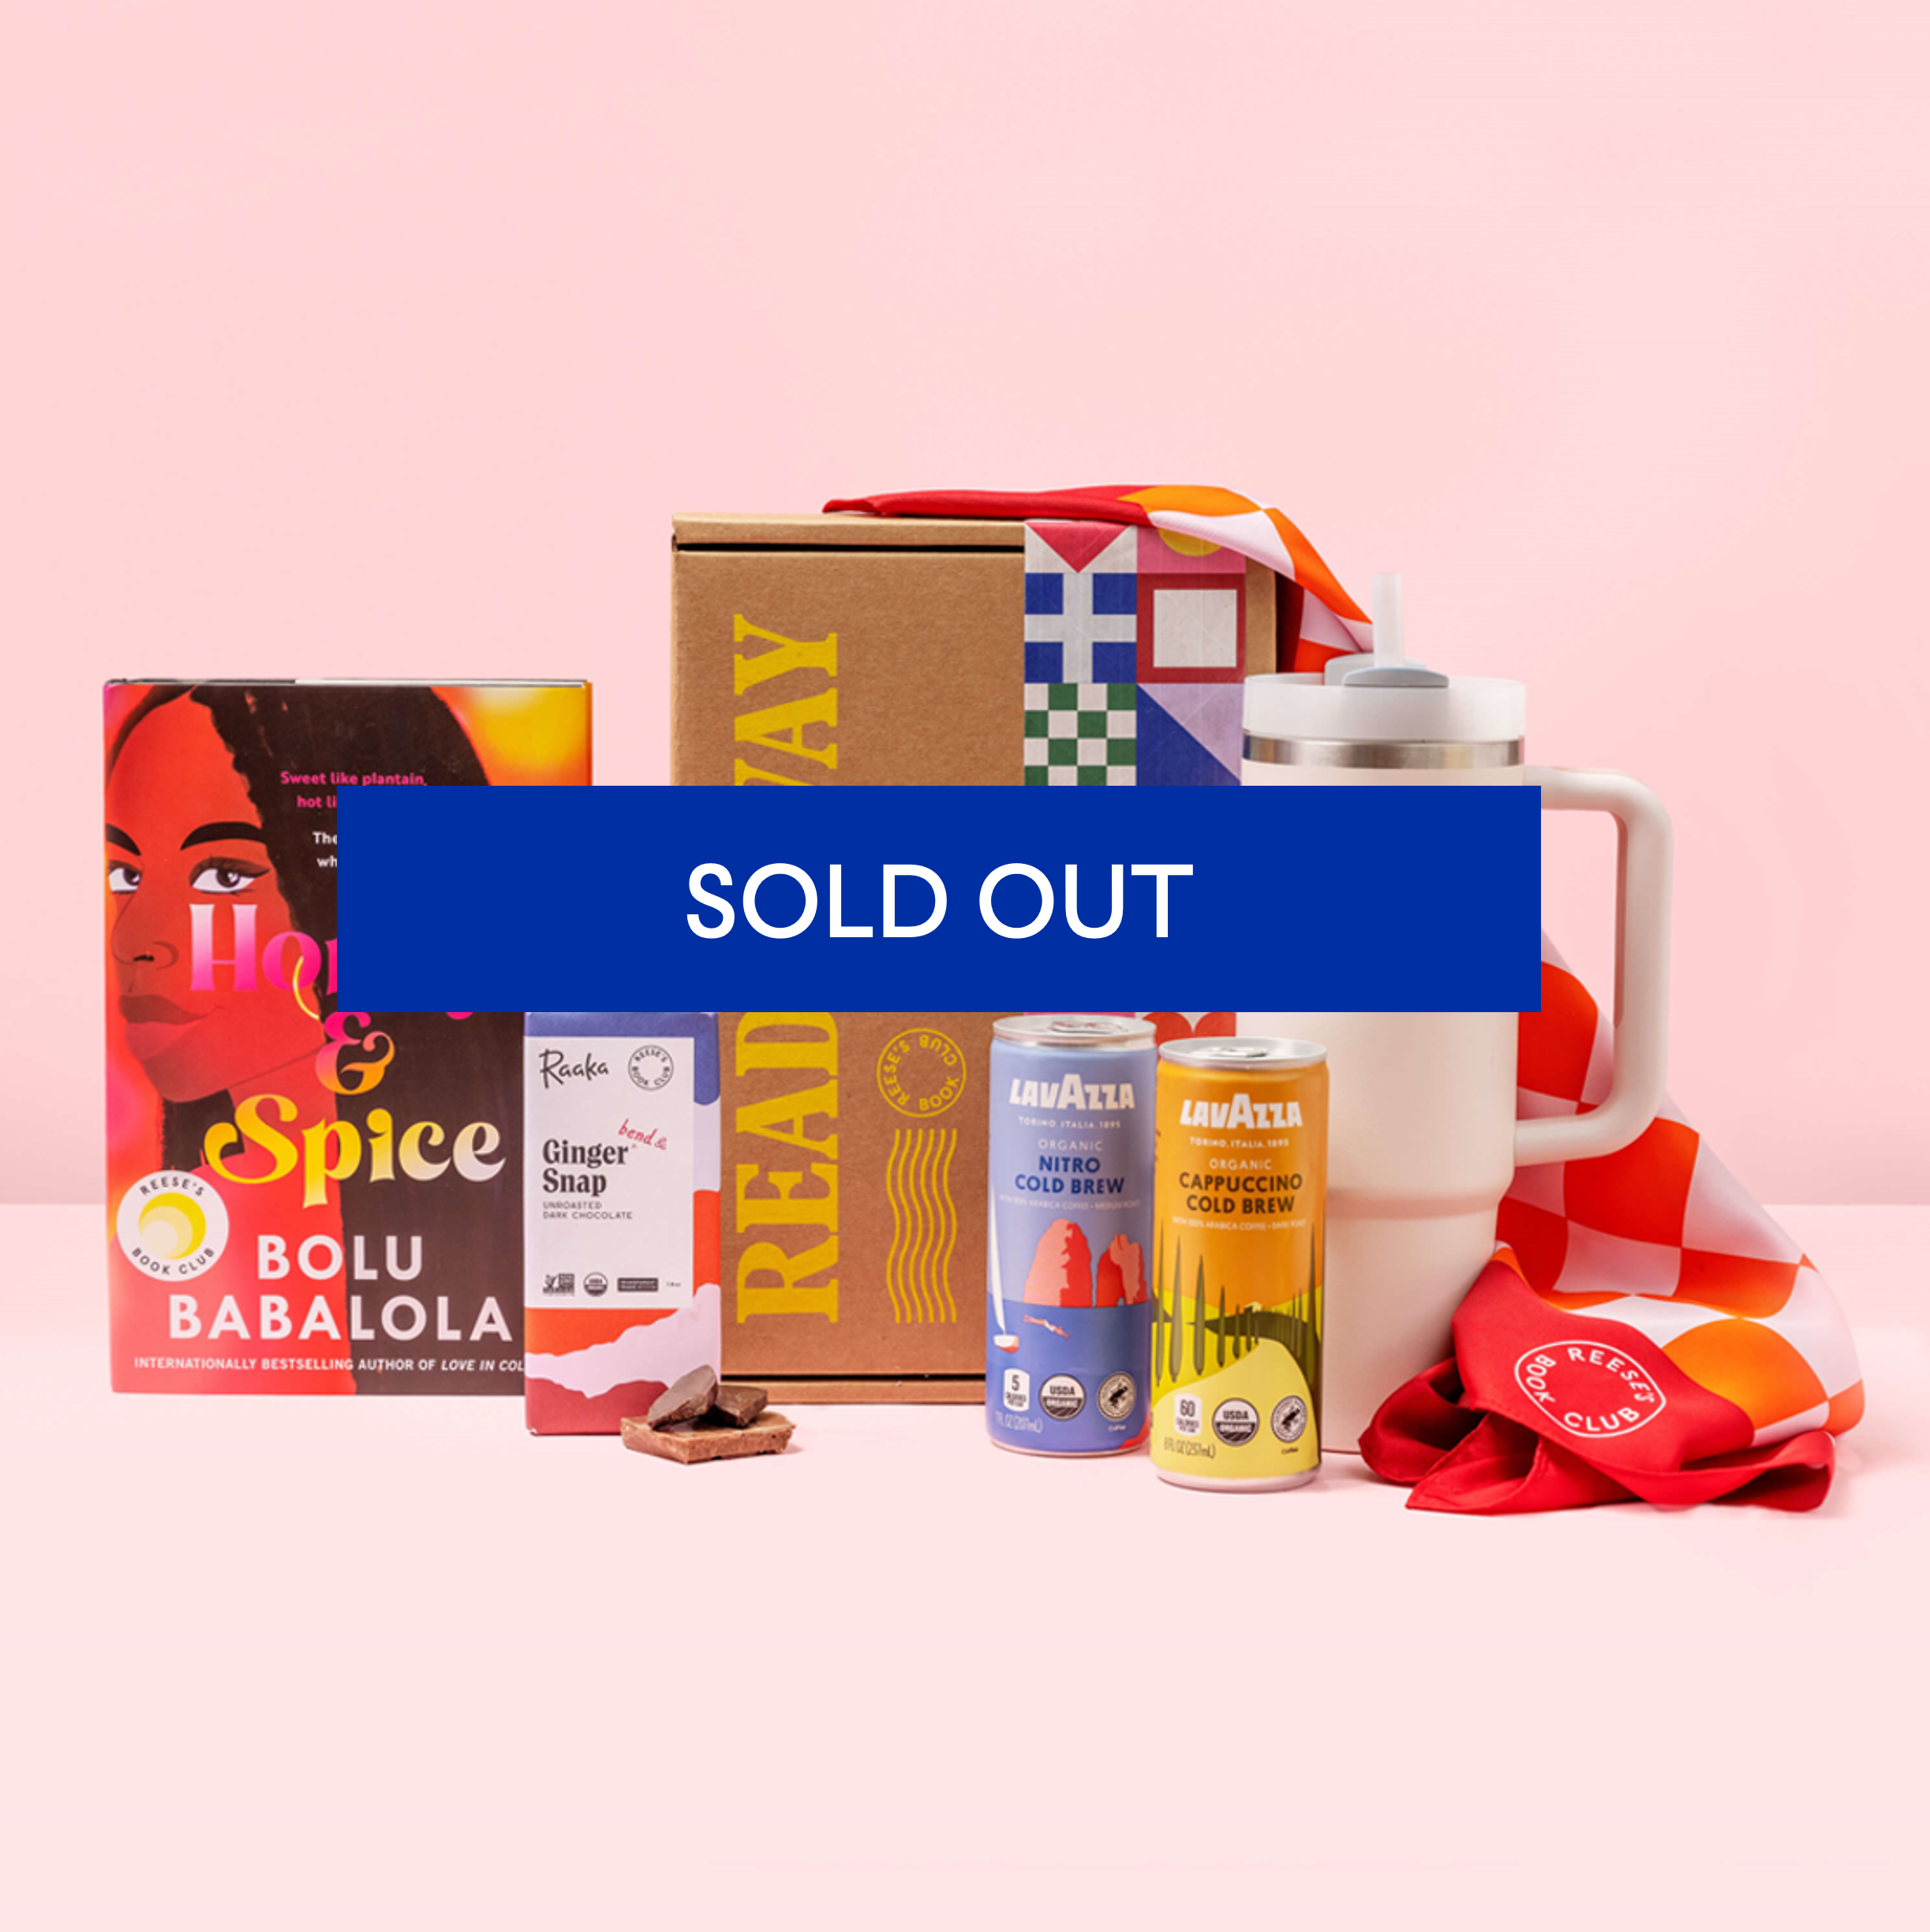 The Romance Lover Box (SOLD OUT)